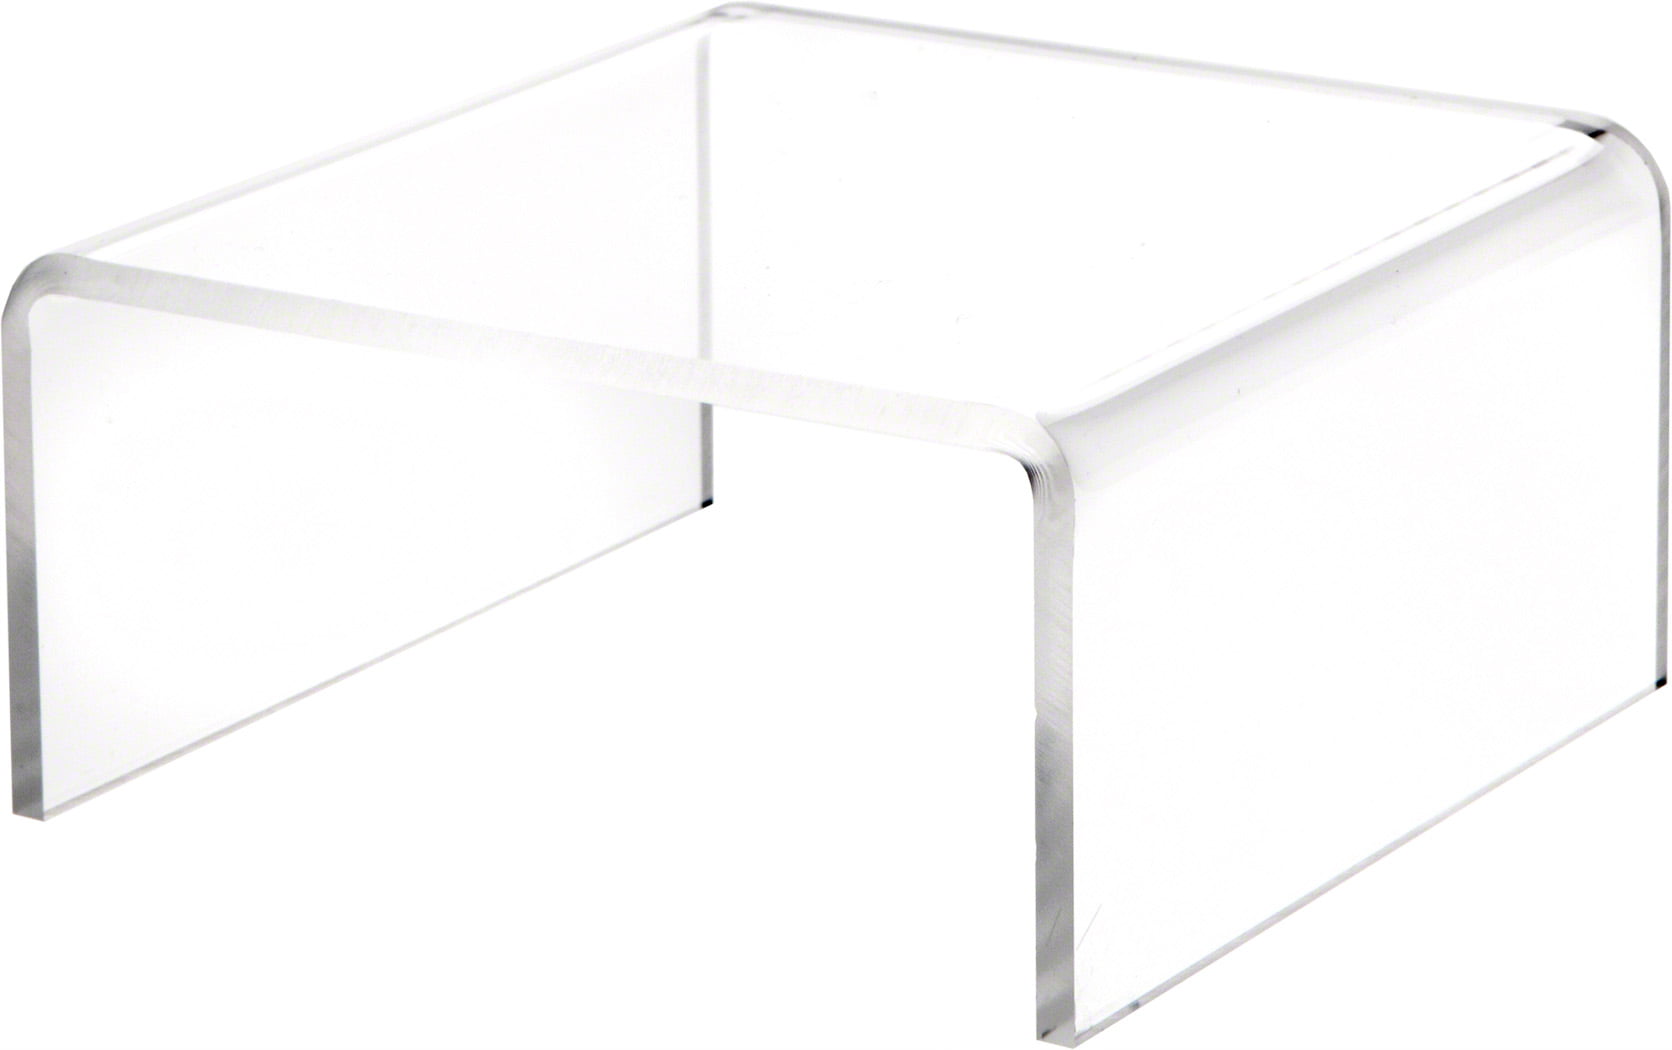 5 OF EACH ACRYLIC STANDARD AND SIDE DISPLAY RISERS 10-PACK 